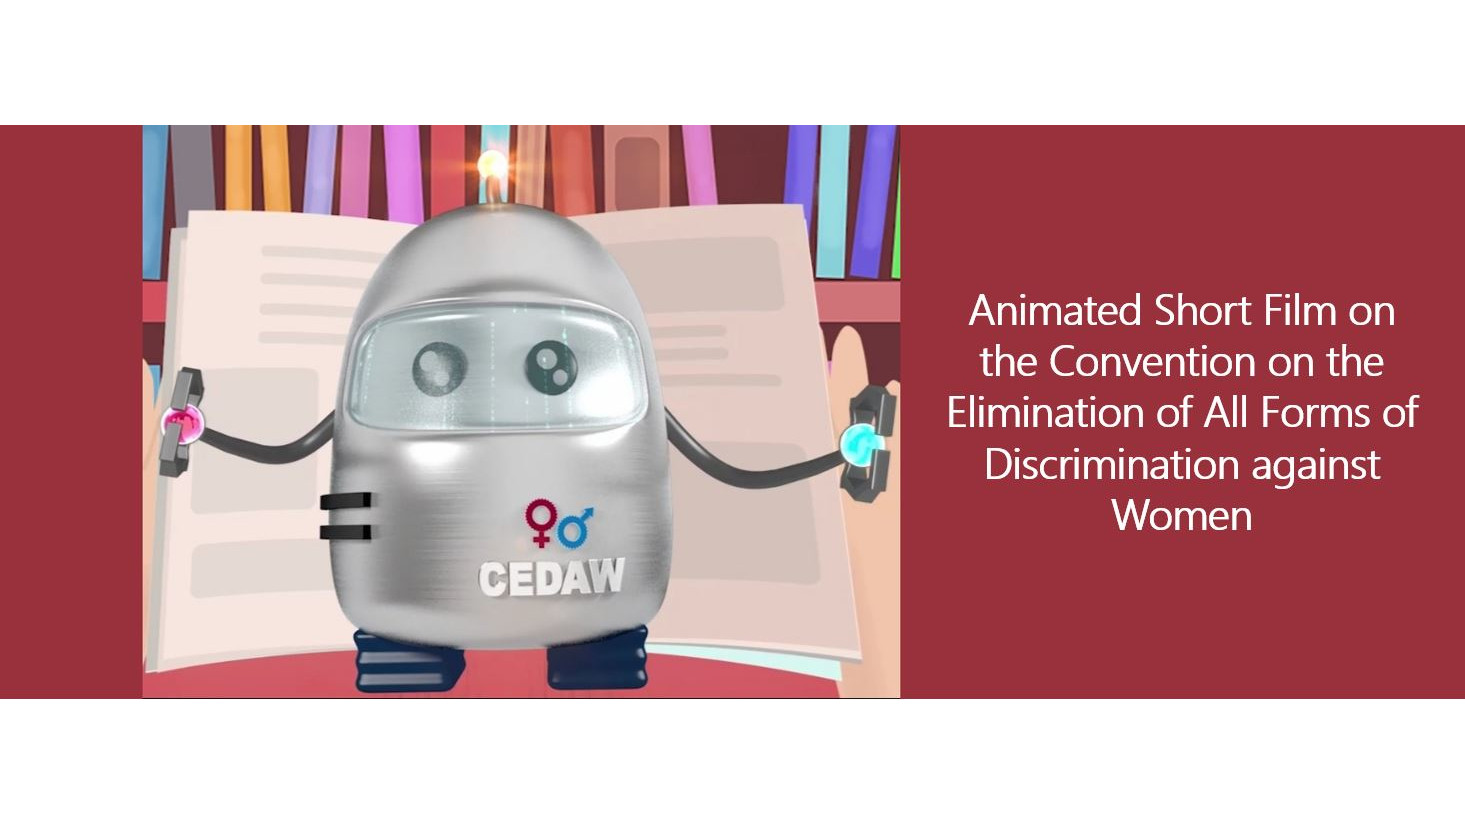 Animated Short Film on the Convention on the Elimination of All Forms of Discrimination against Women